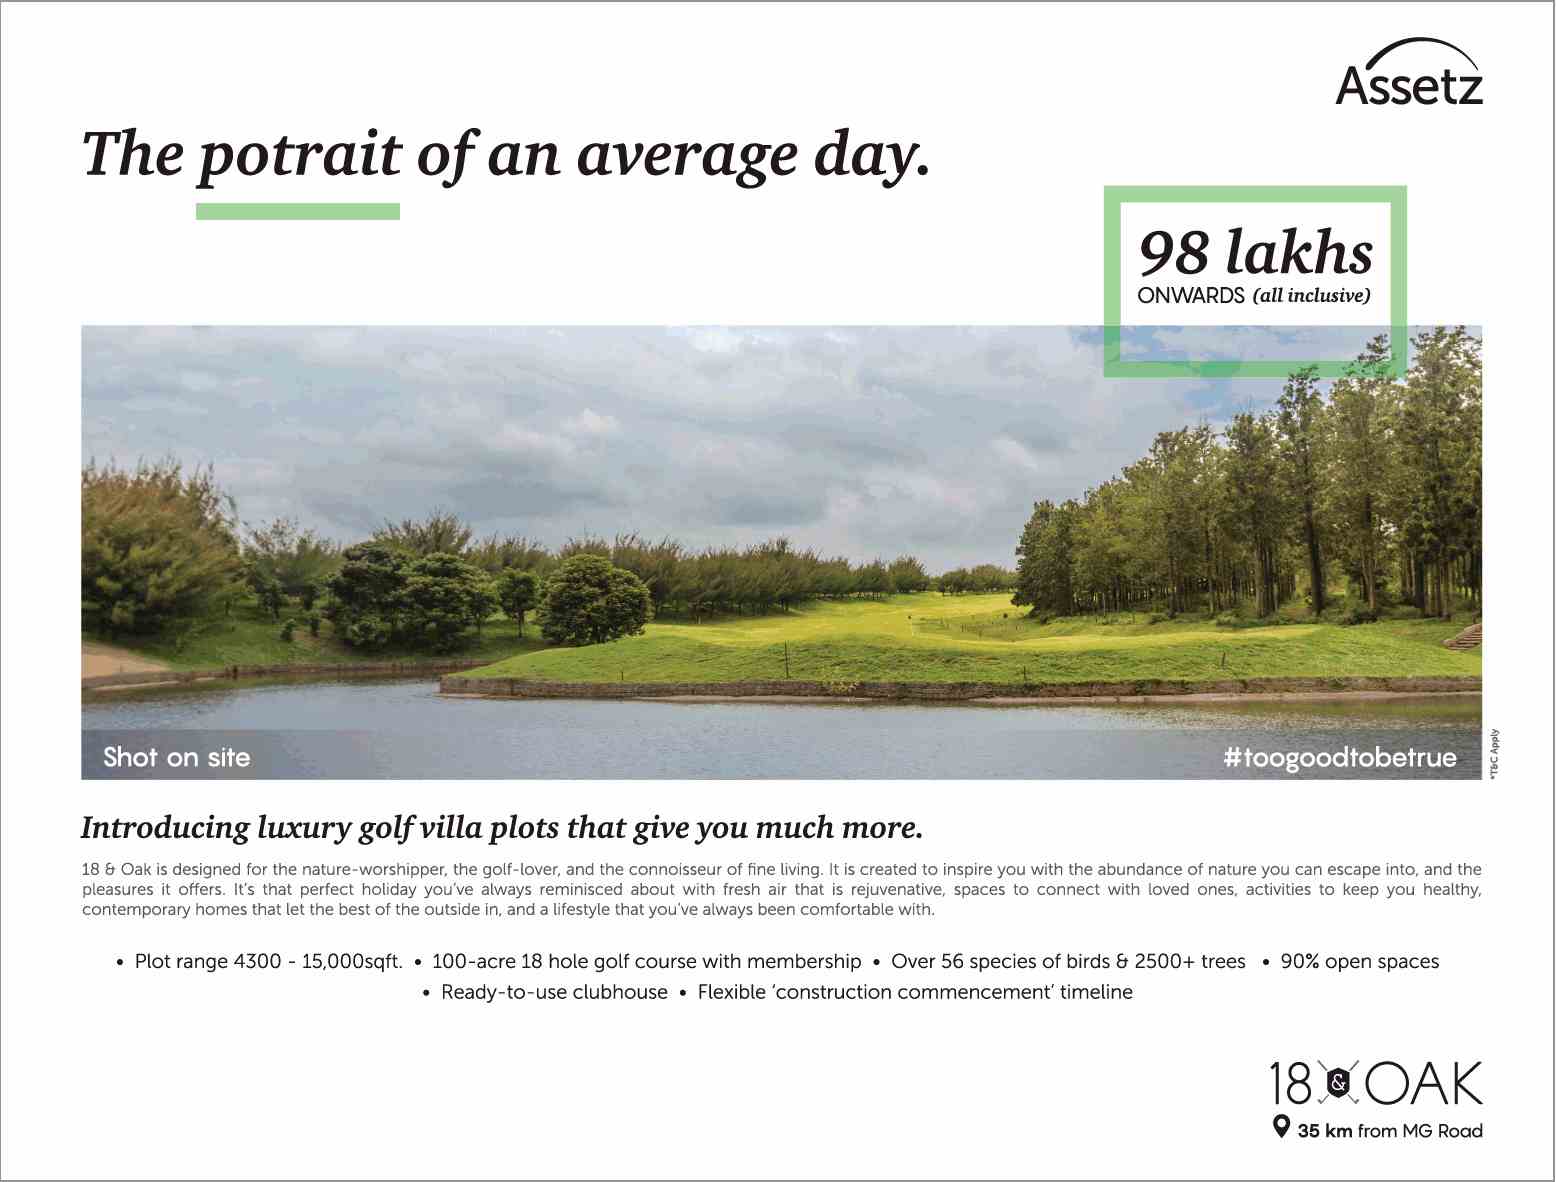 Introducing luxury golf villa plots that give you much more at Assetz 18 & Oak in Bangalore Update